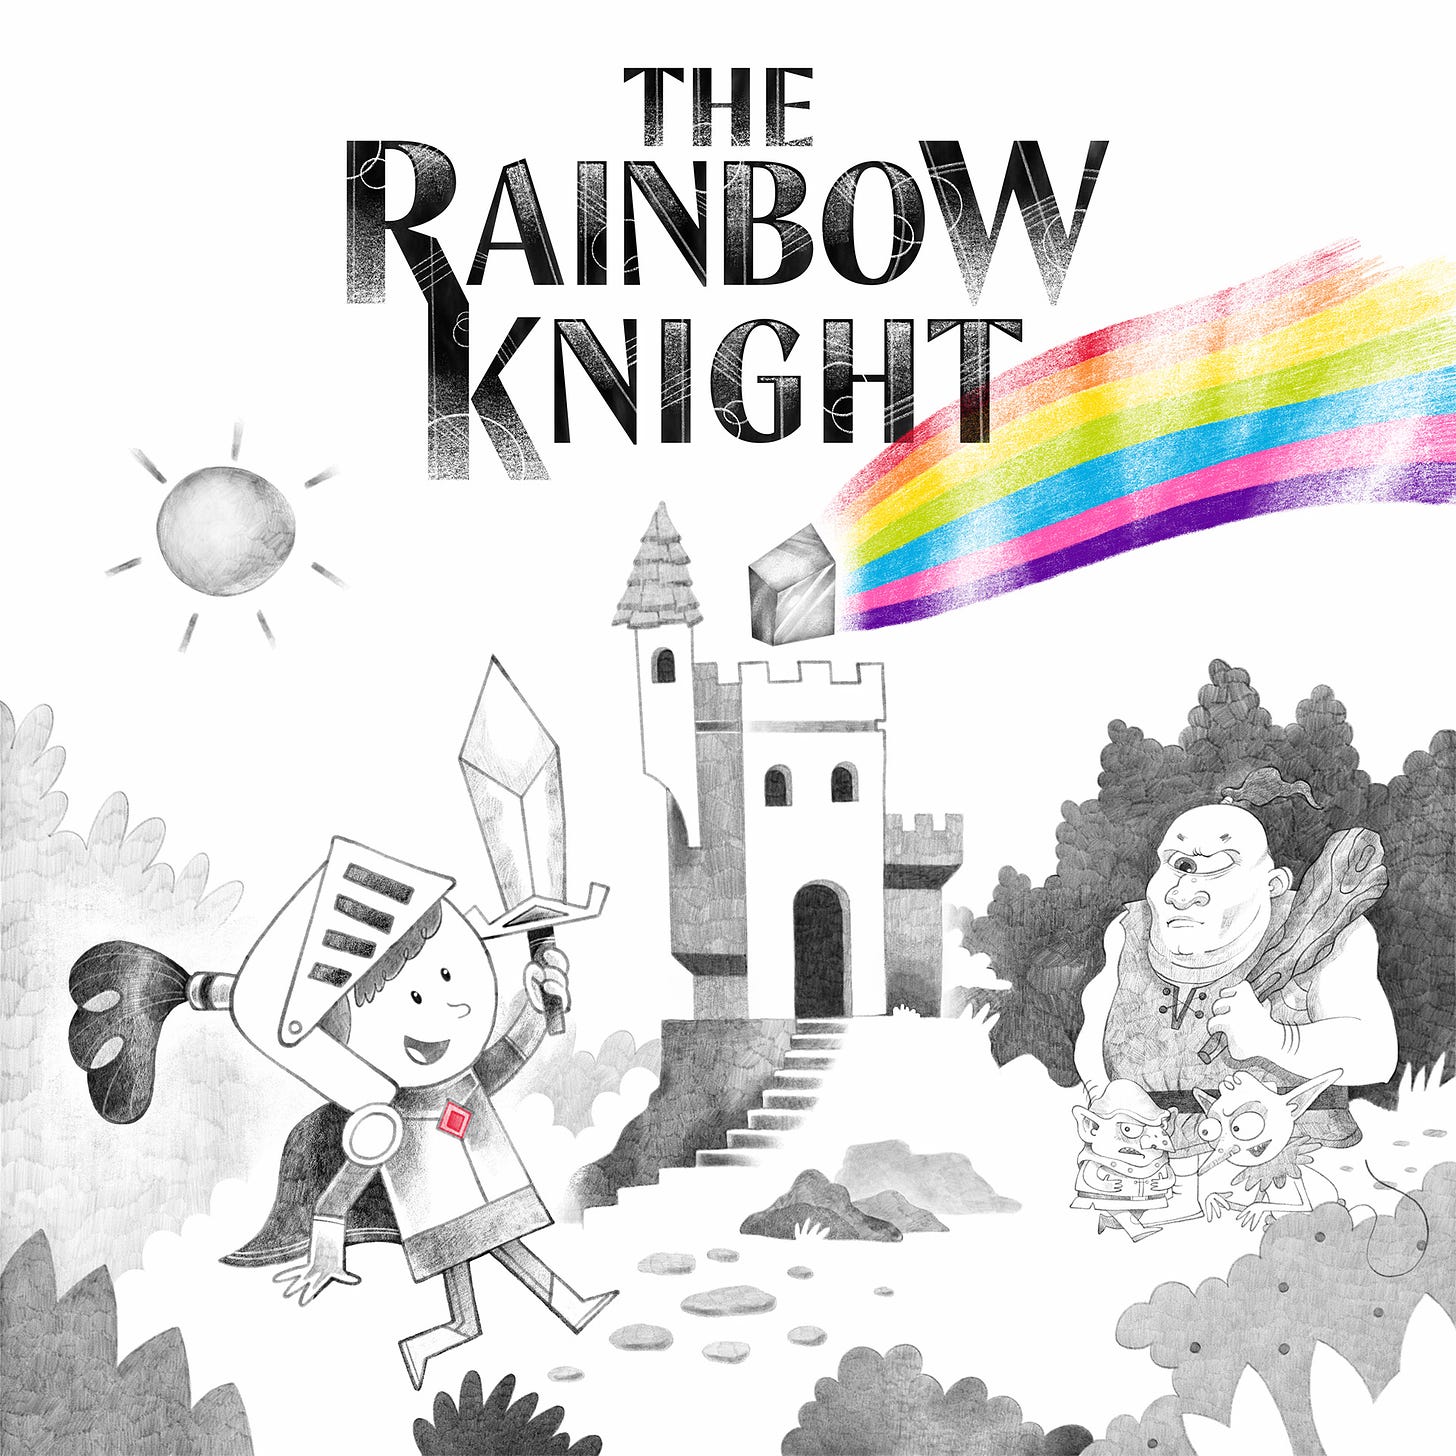 A knight about to fight an ogre, with a rainbow across the top